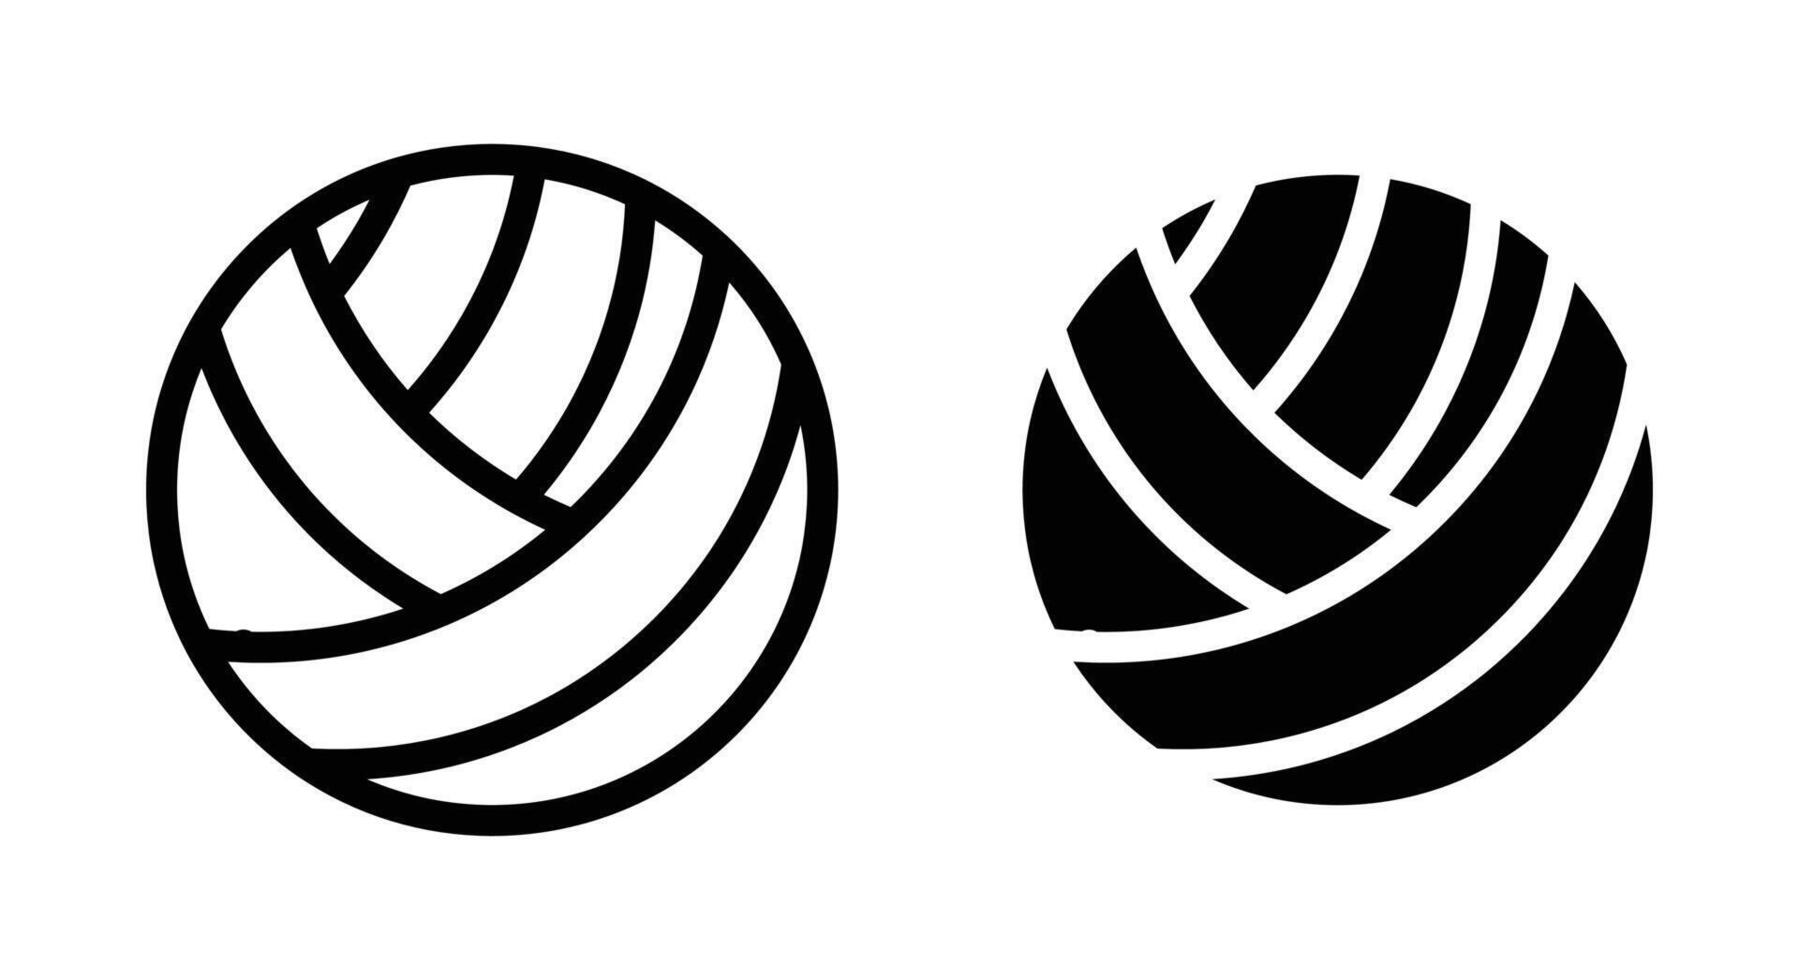 volleyball vector icon